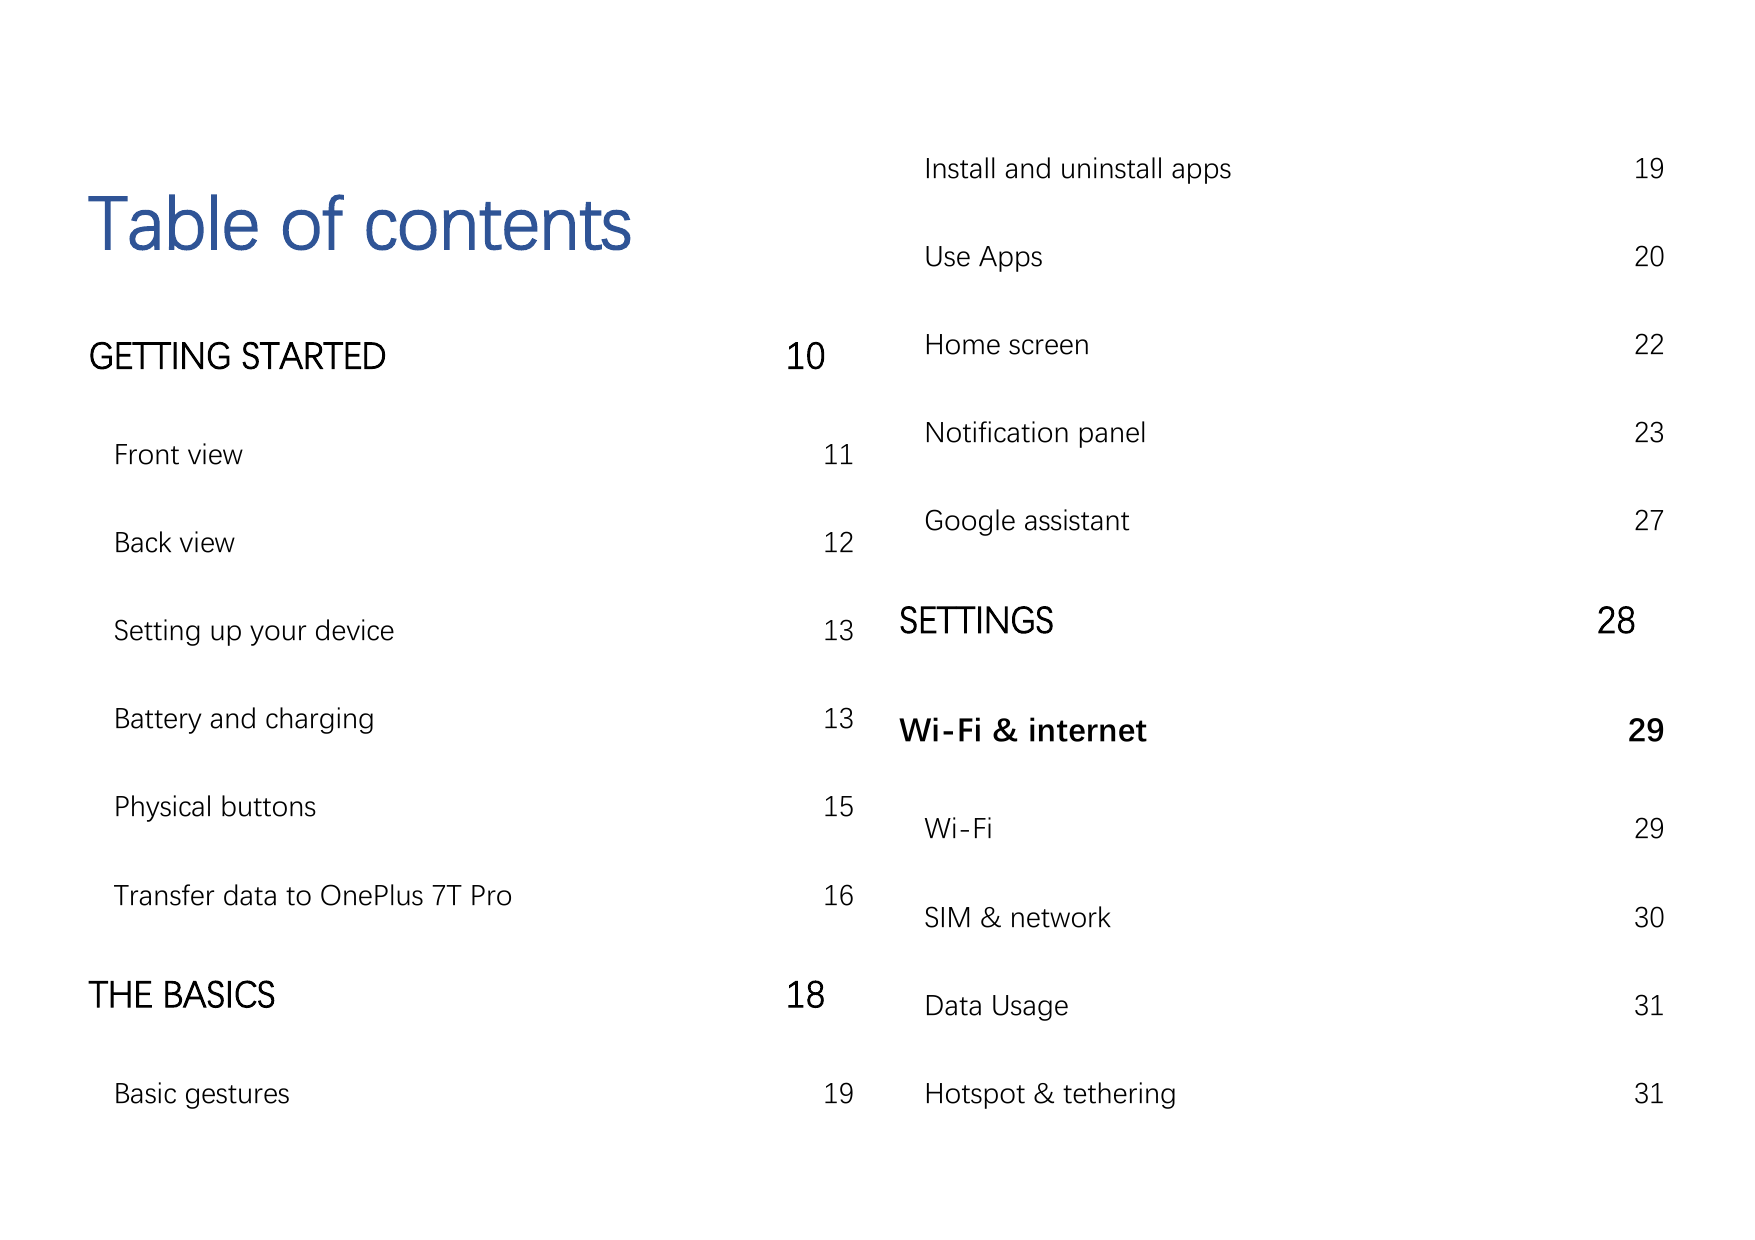 Table of contentsGETTING STARTED10Install and uninstall apps19Use Apps20Home screen22Notification panel23Google assistant27Front